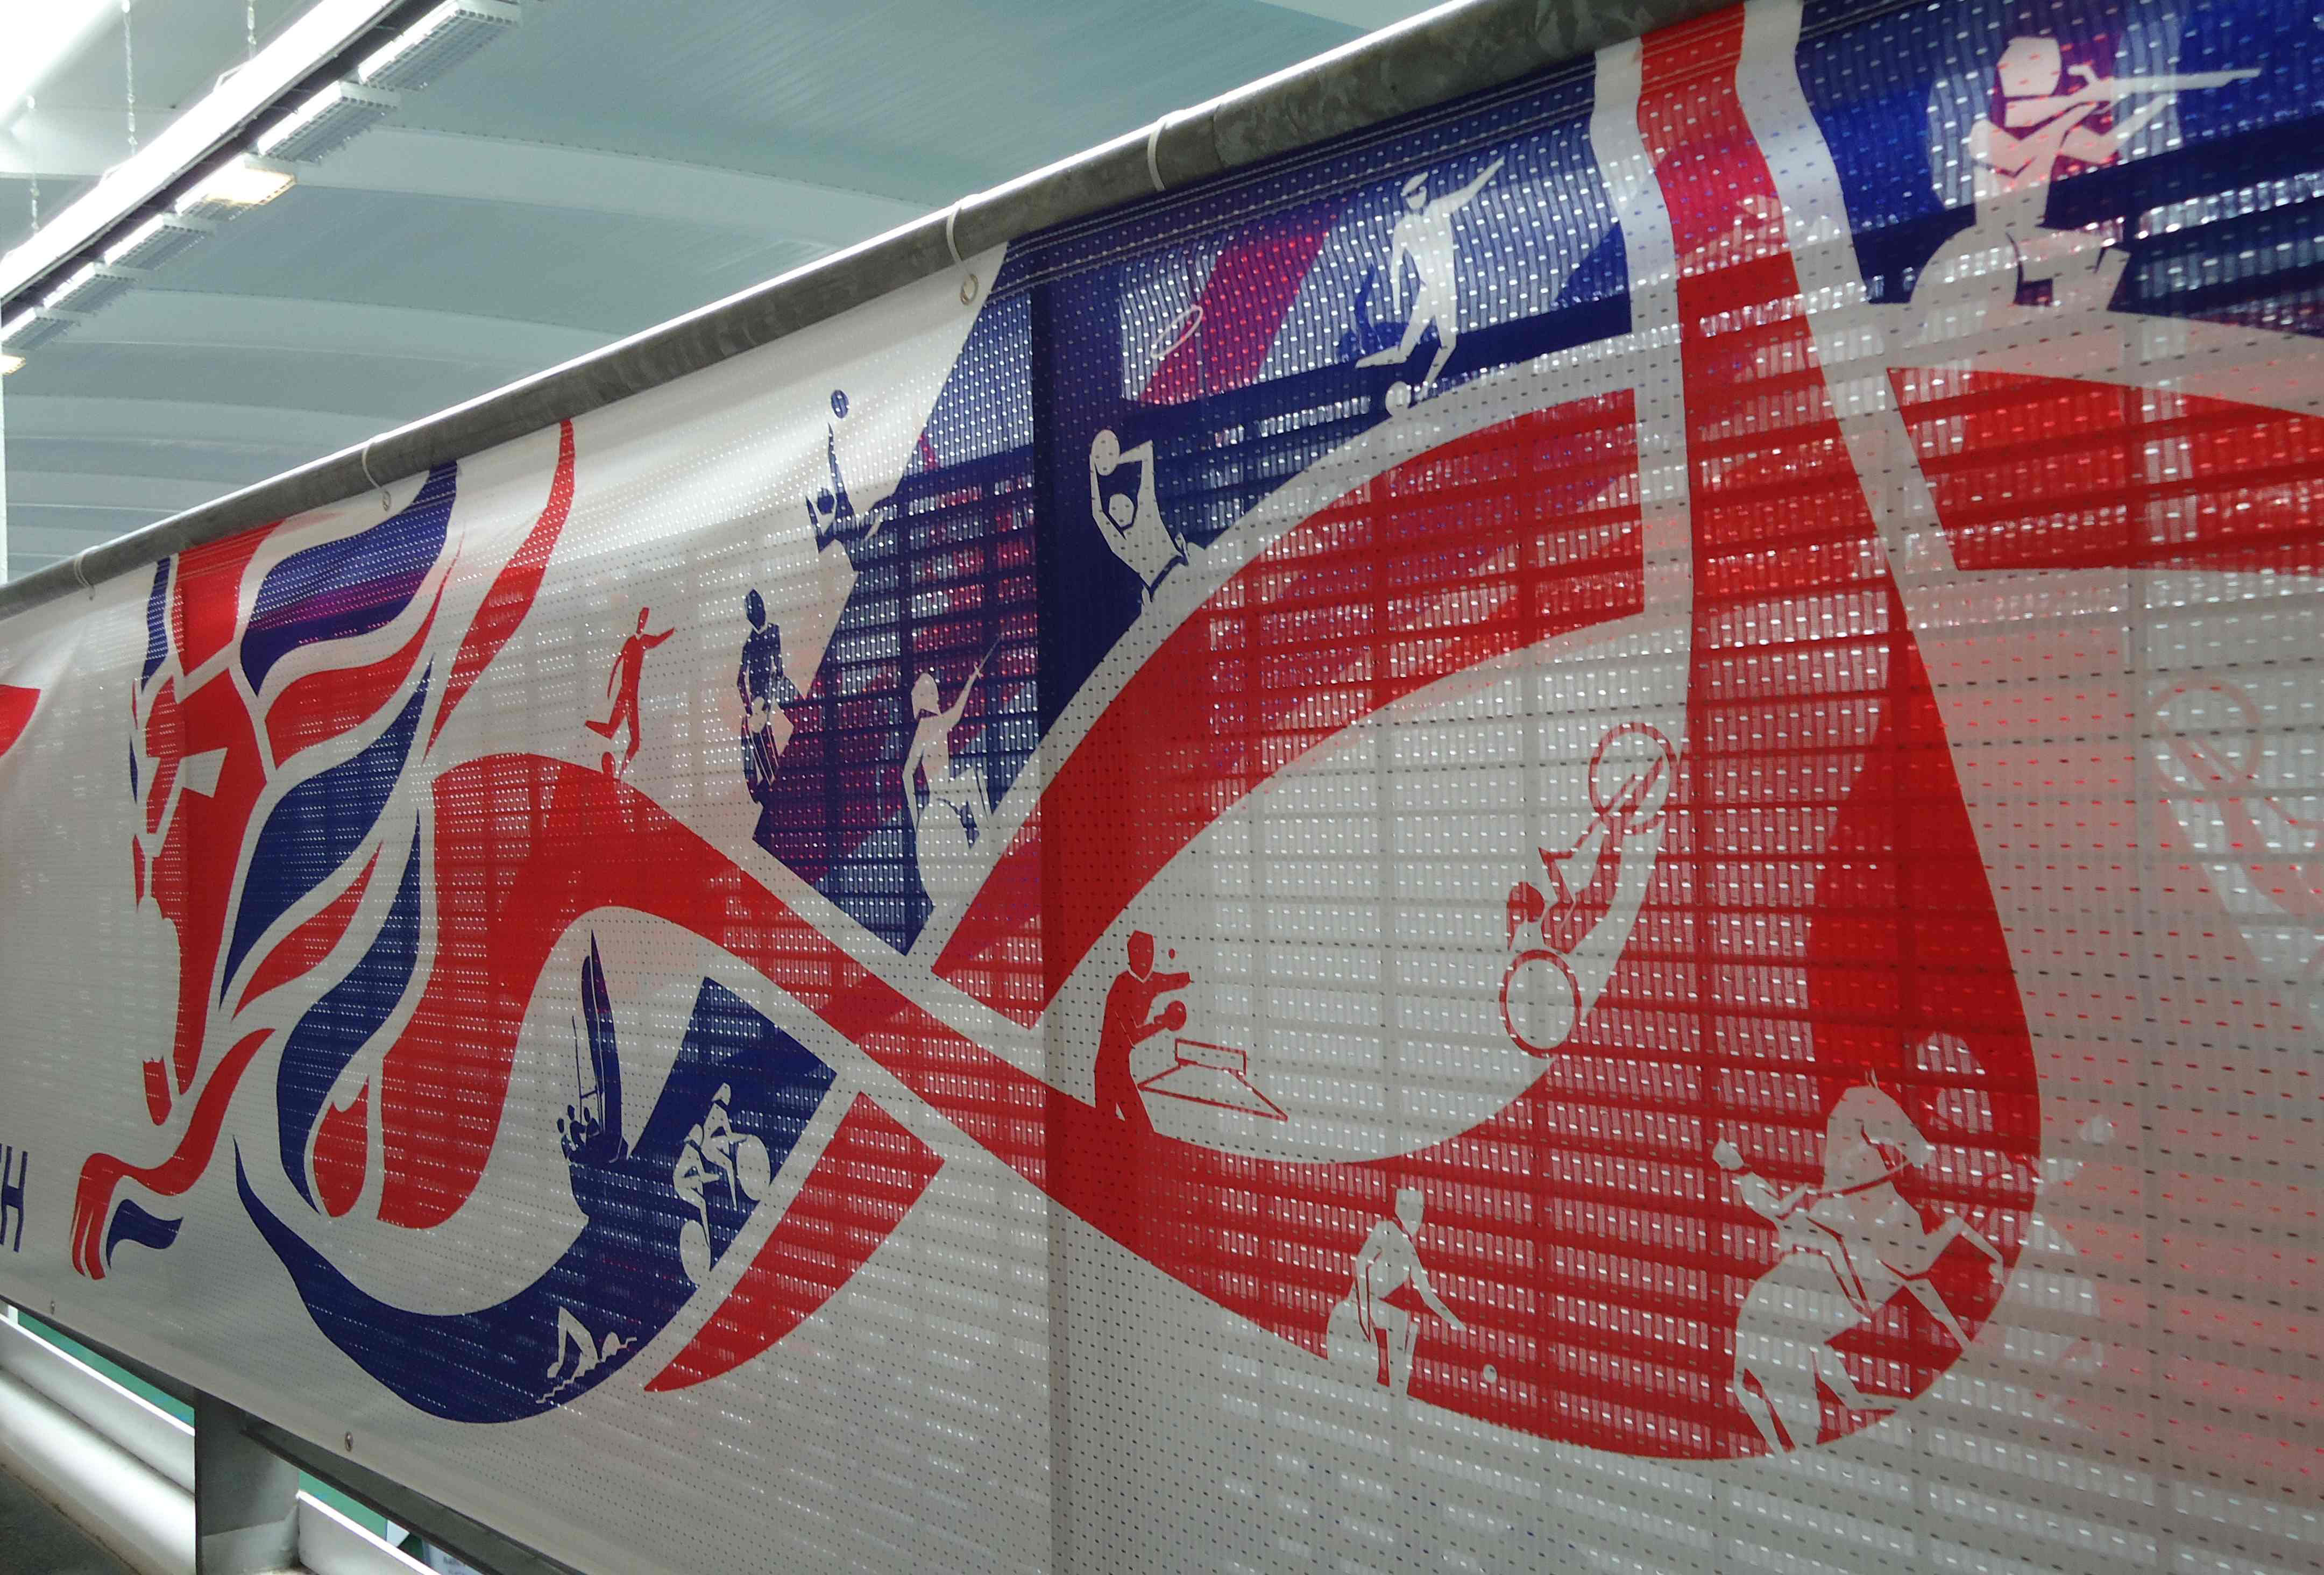 A close up of the "Roaring Lion" large scale design at the 2012 London Paralympic Games.